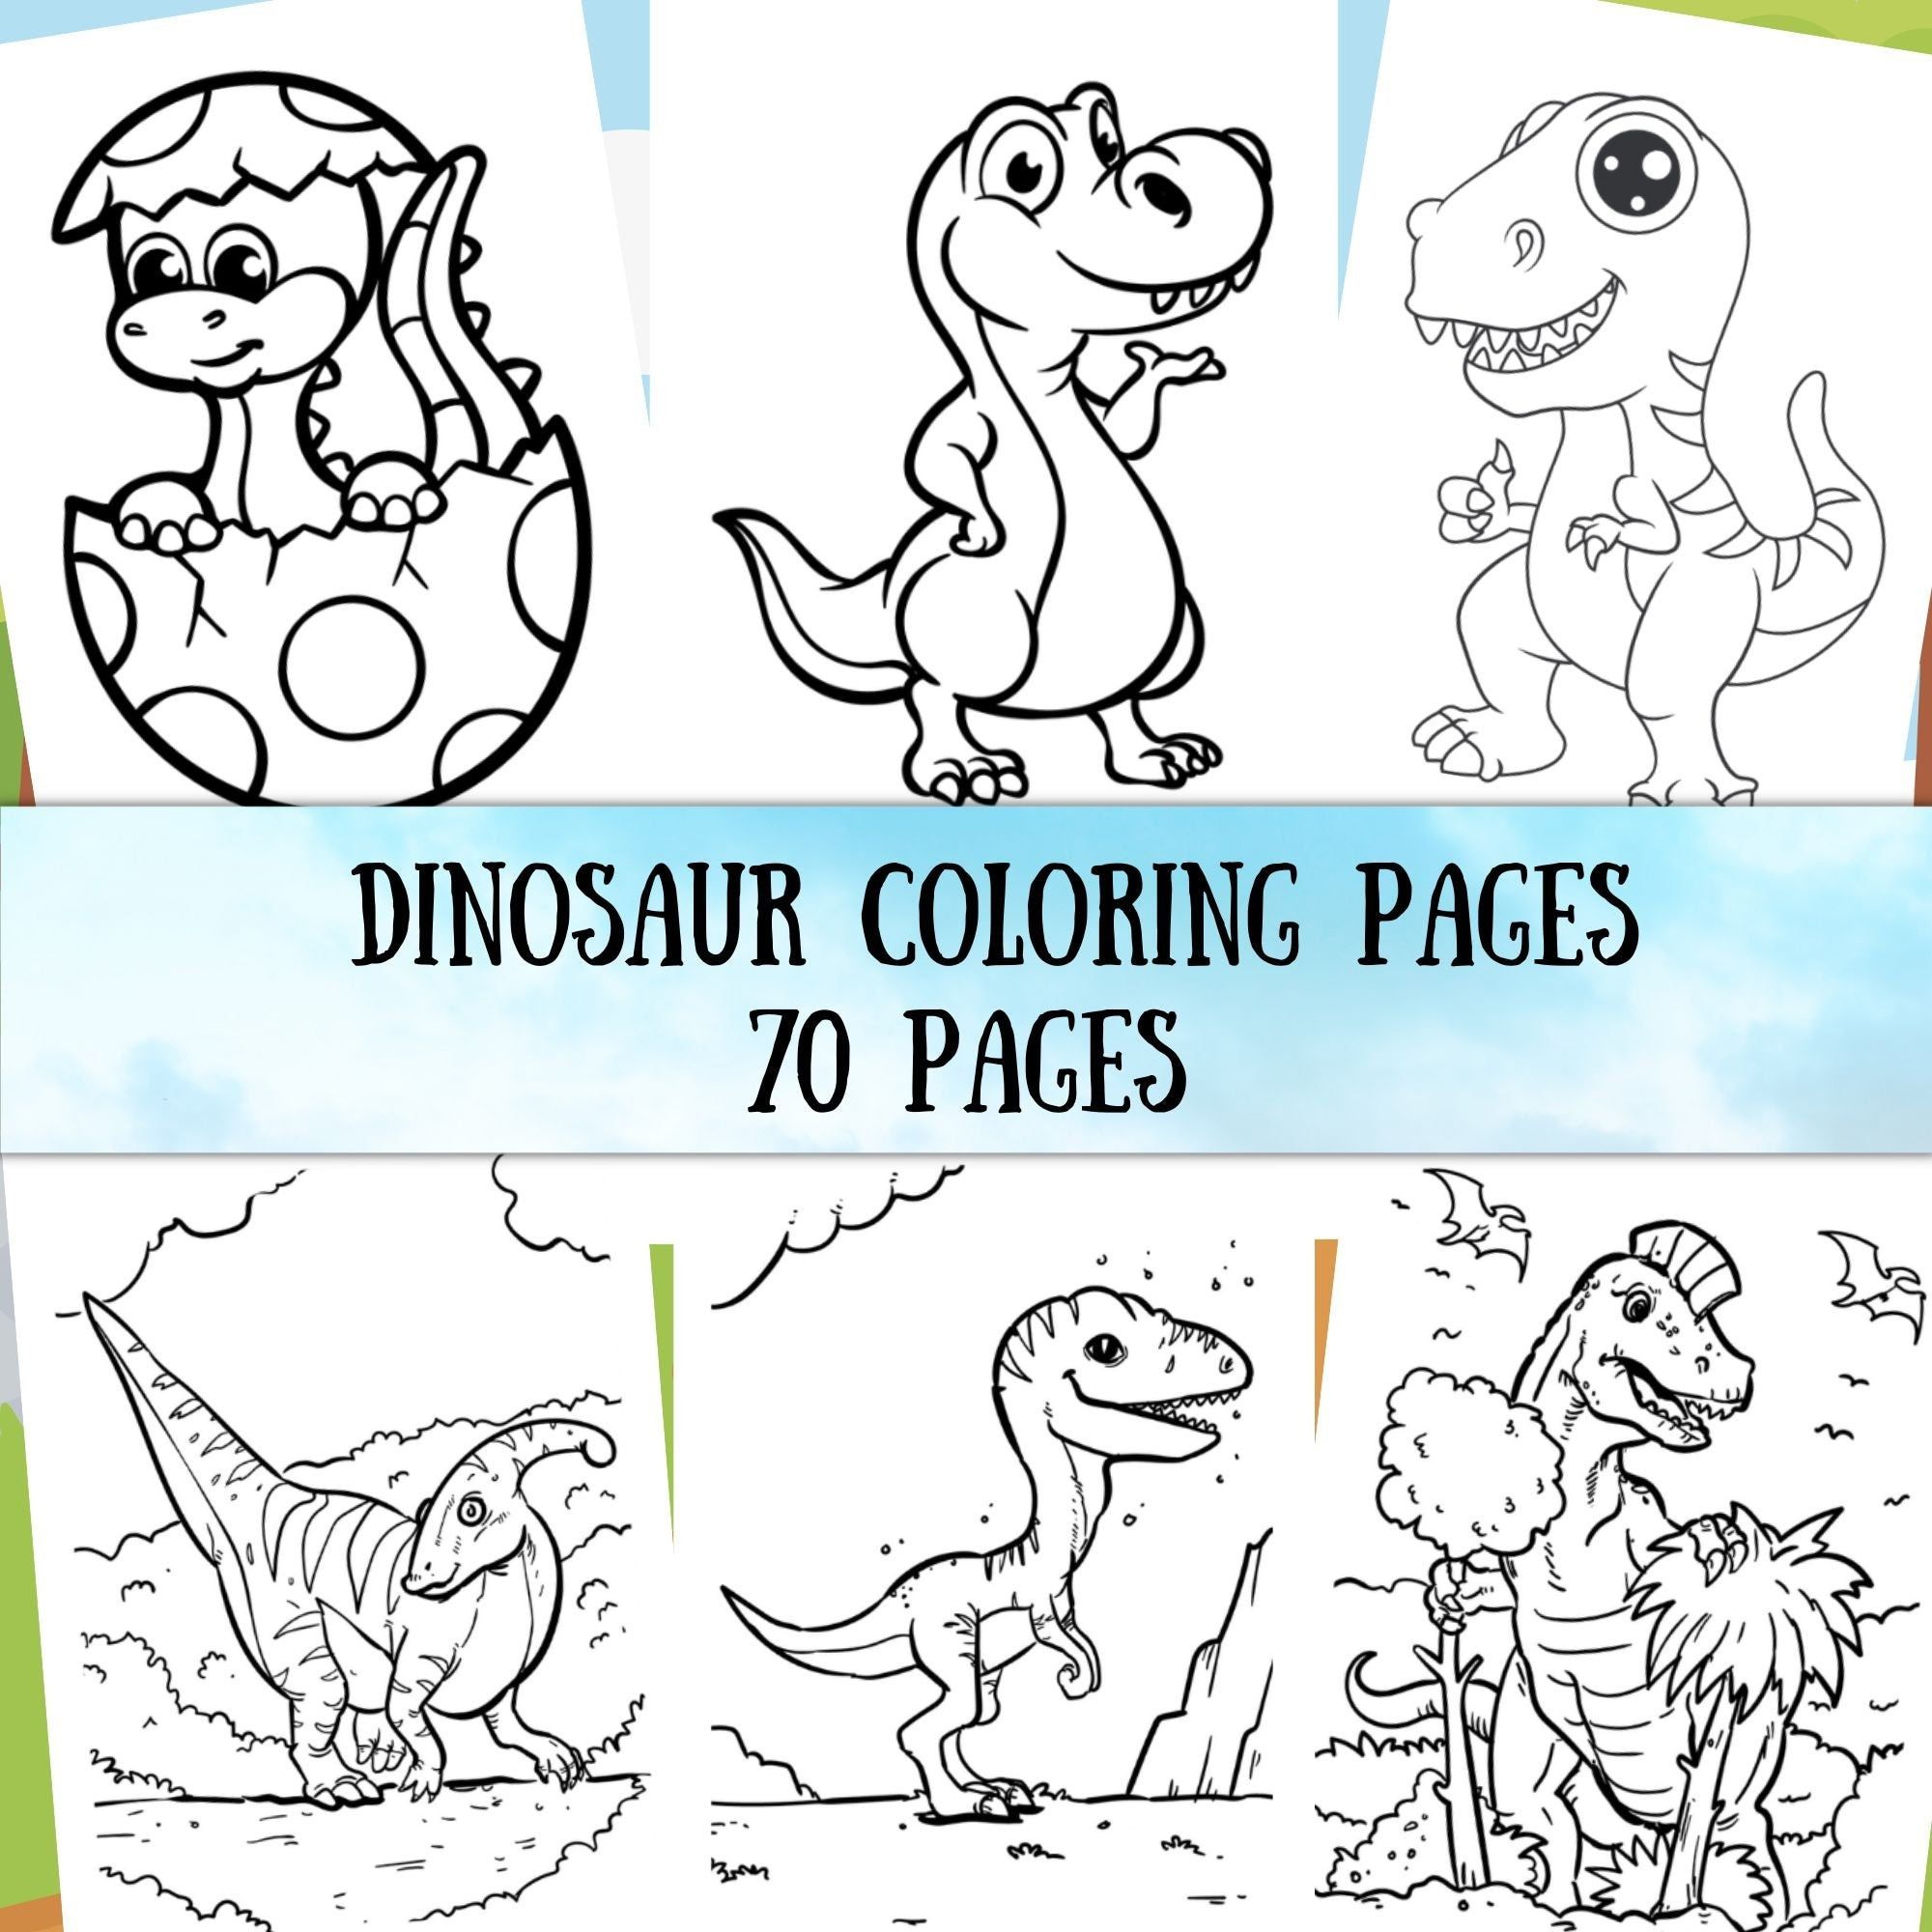 70 Dinosaur Printable Coloring Pages, Kids Coloring Practice, Dinosaur 70 Pictures To Print & Color, Children Coloring Book Digital Download